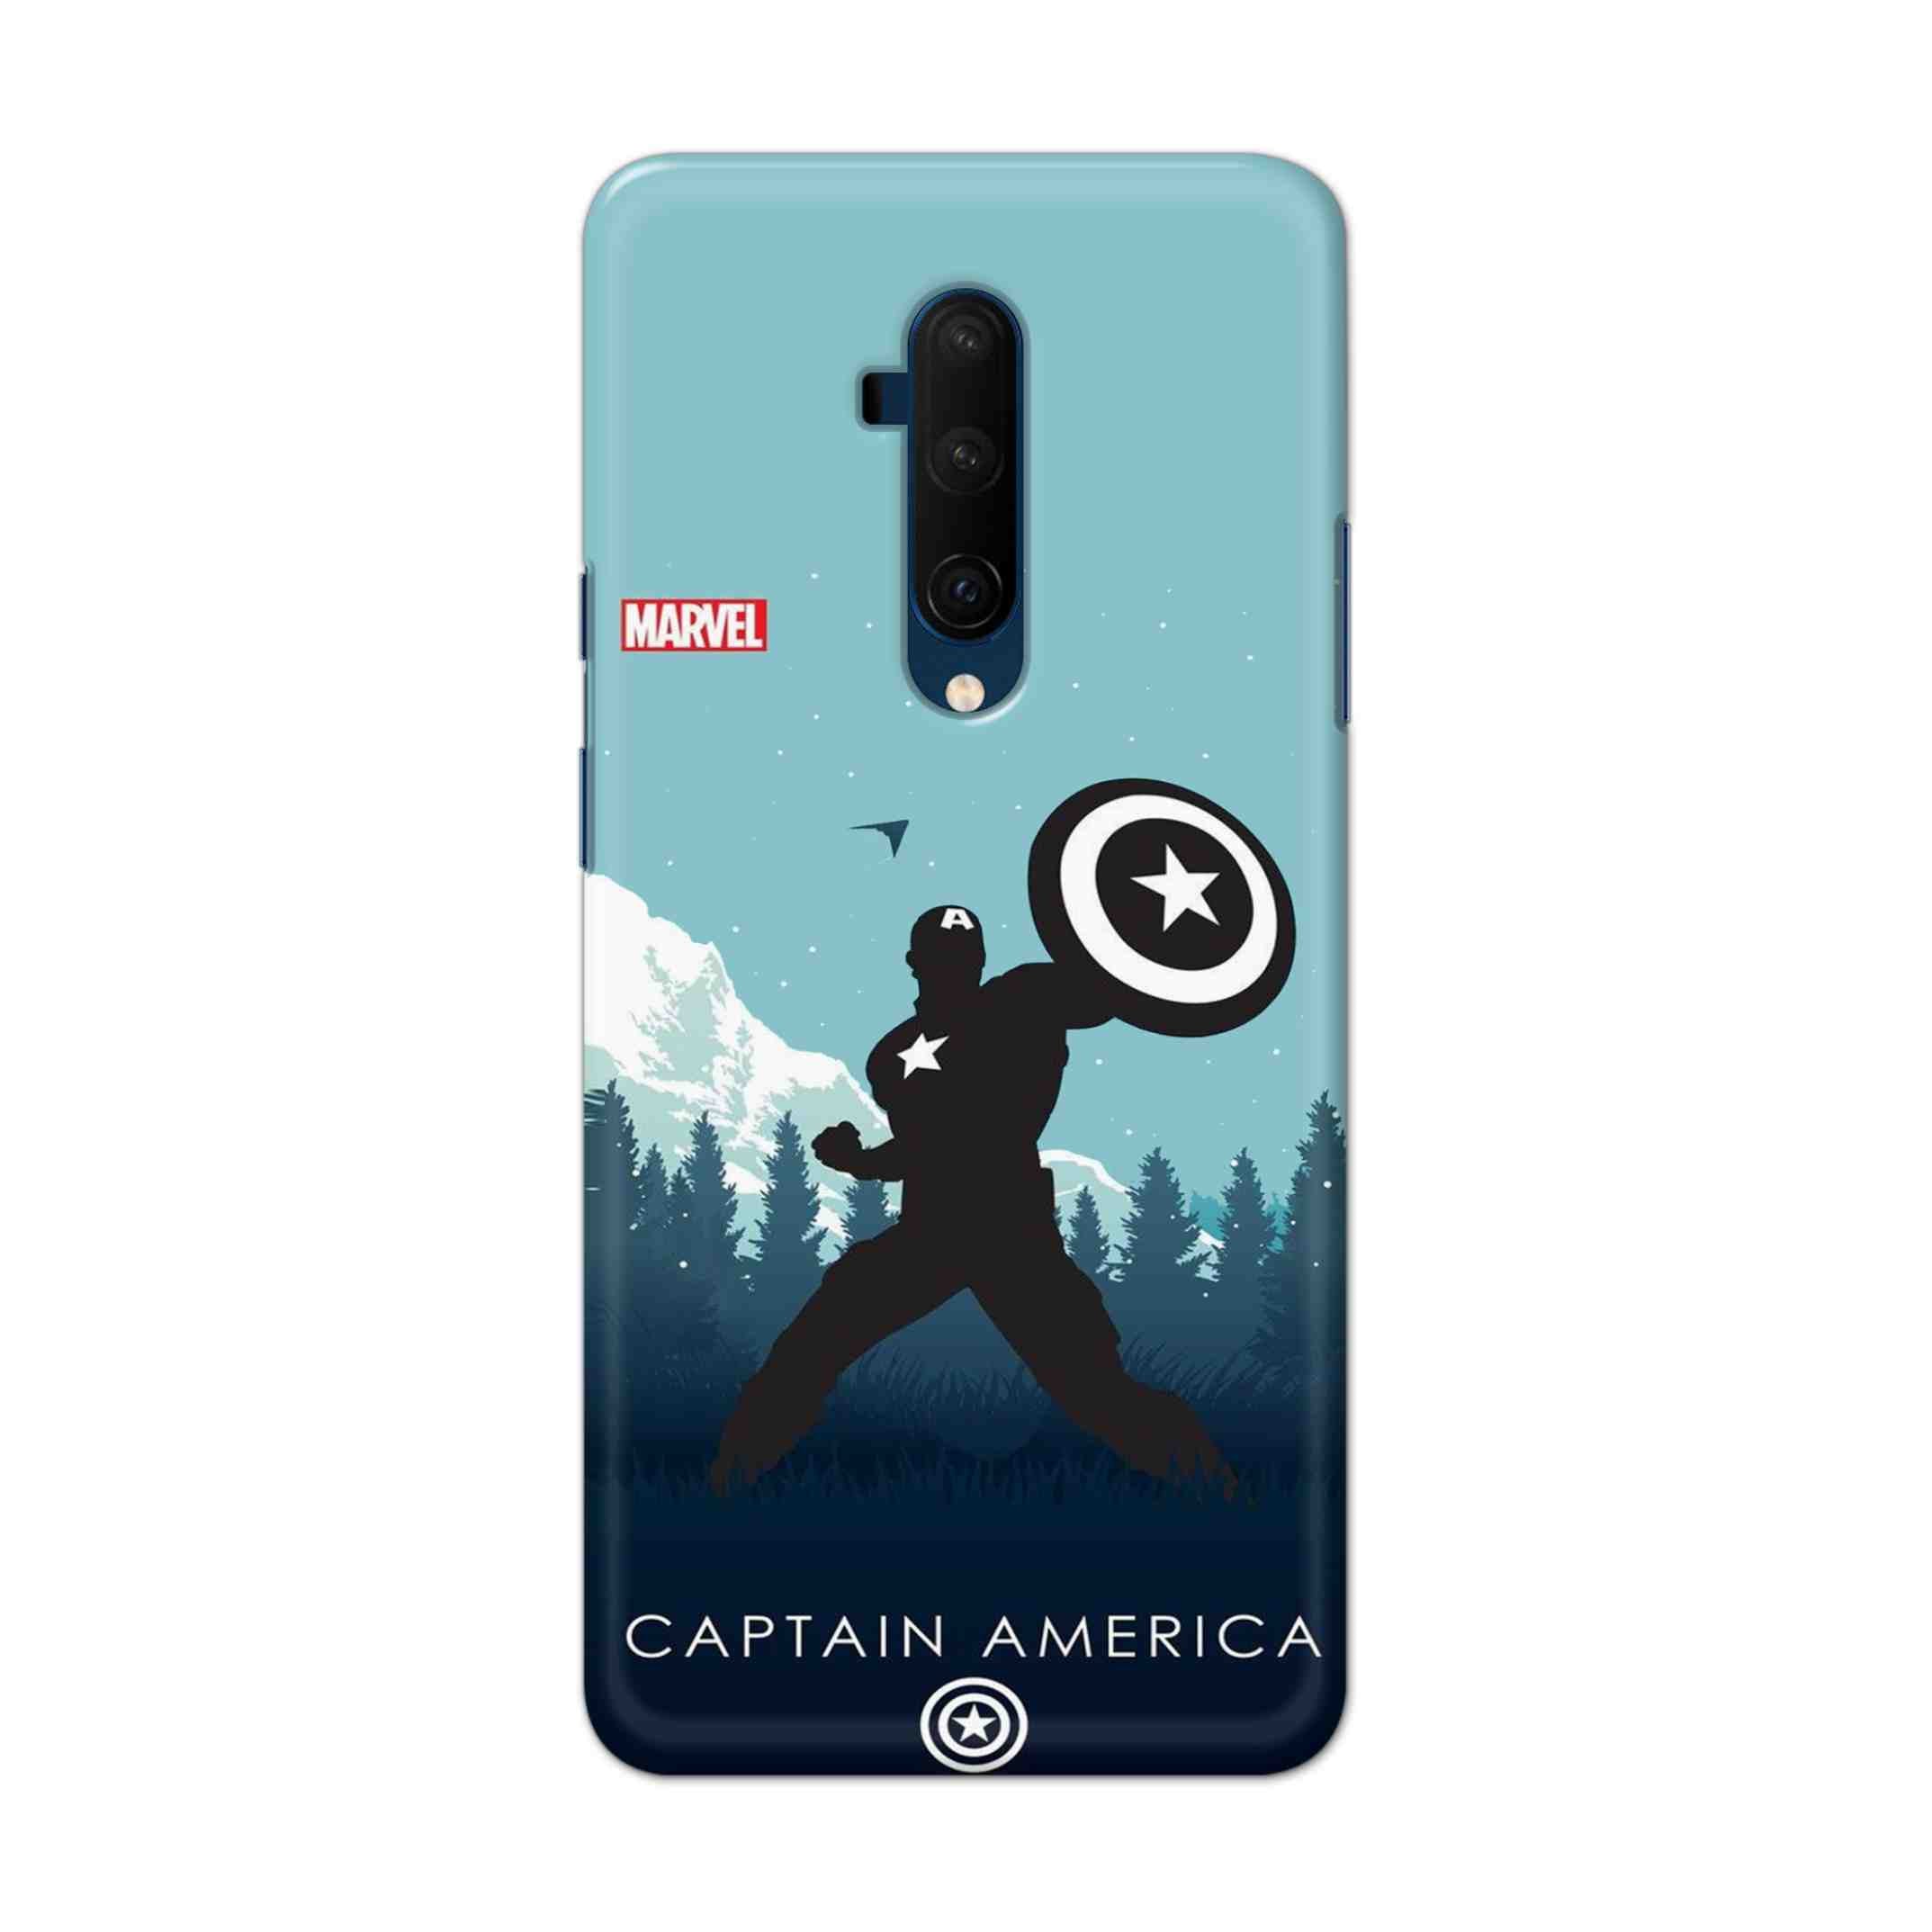 Buy Captain America Hard Back Mobile Phone Case Cover For OnePlus 7T Pro Online